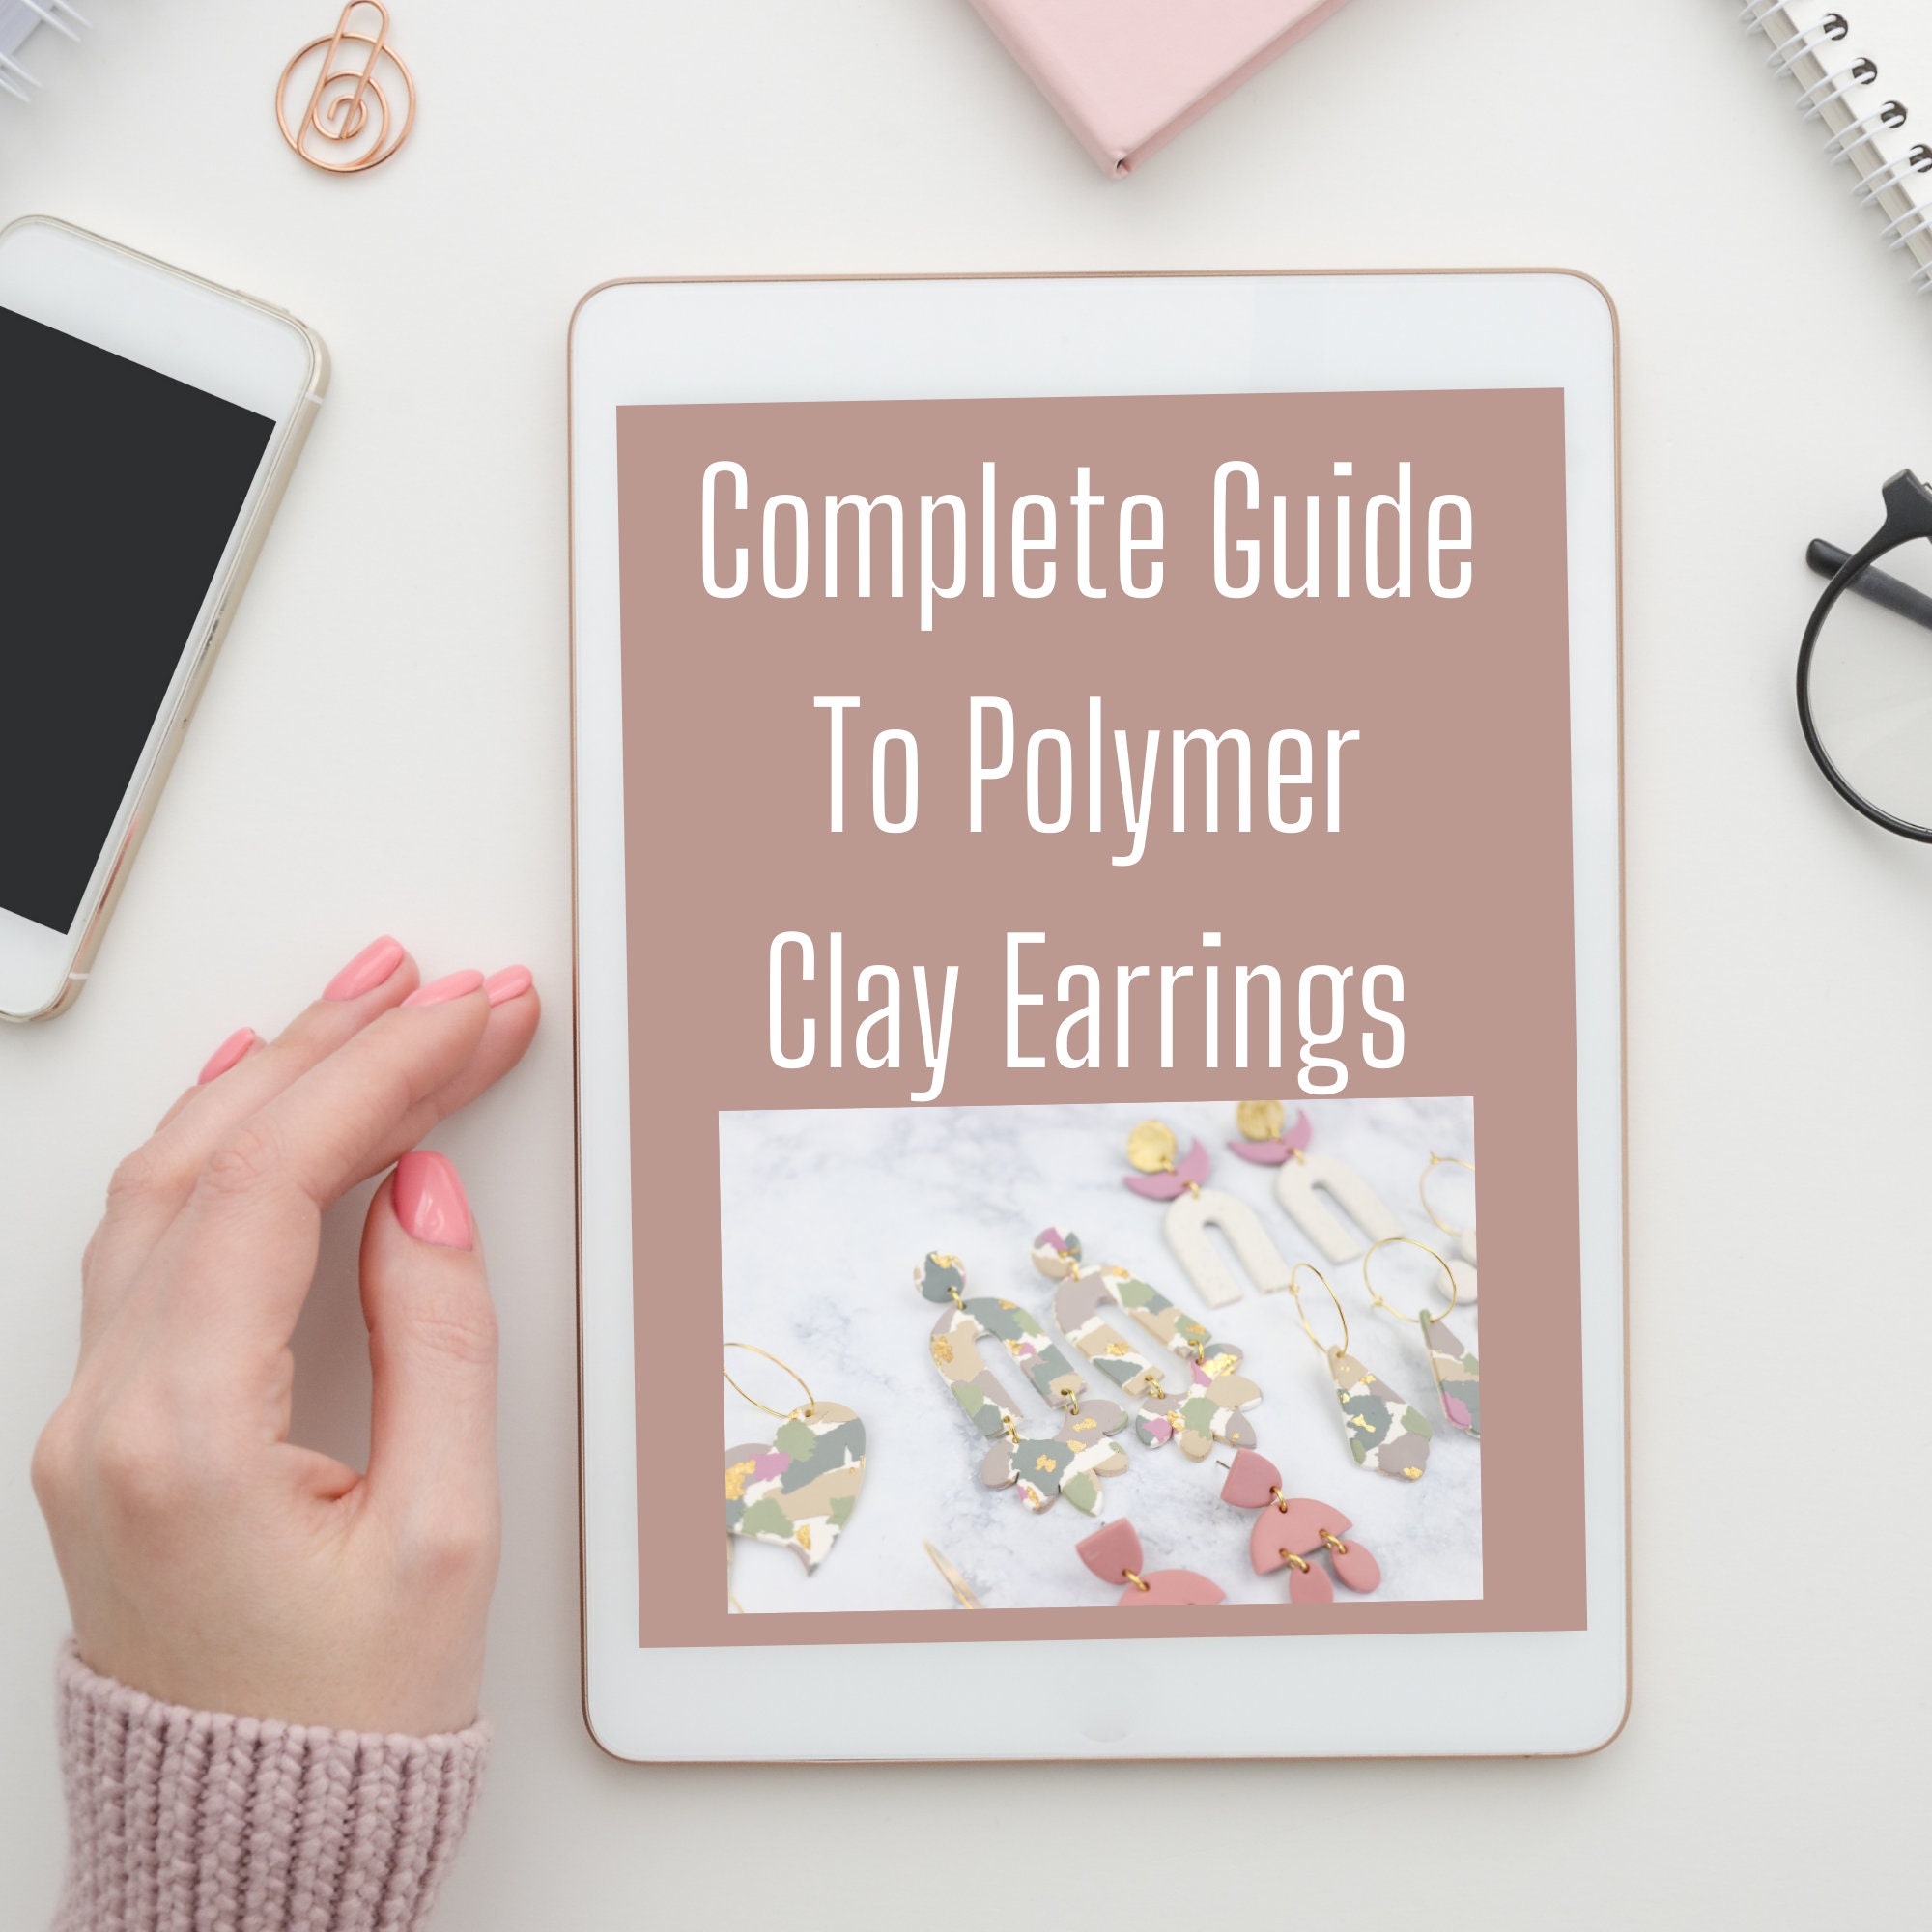 AIXPI Polymer Clay Earrings Making Kit Include 32Pcs Polymer Clay Cutters,  24 Colors Bake Clay, Earring Hooks Accessories for Making Earrings, Clay  Earring Jewelry Making Supplies for Girls 